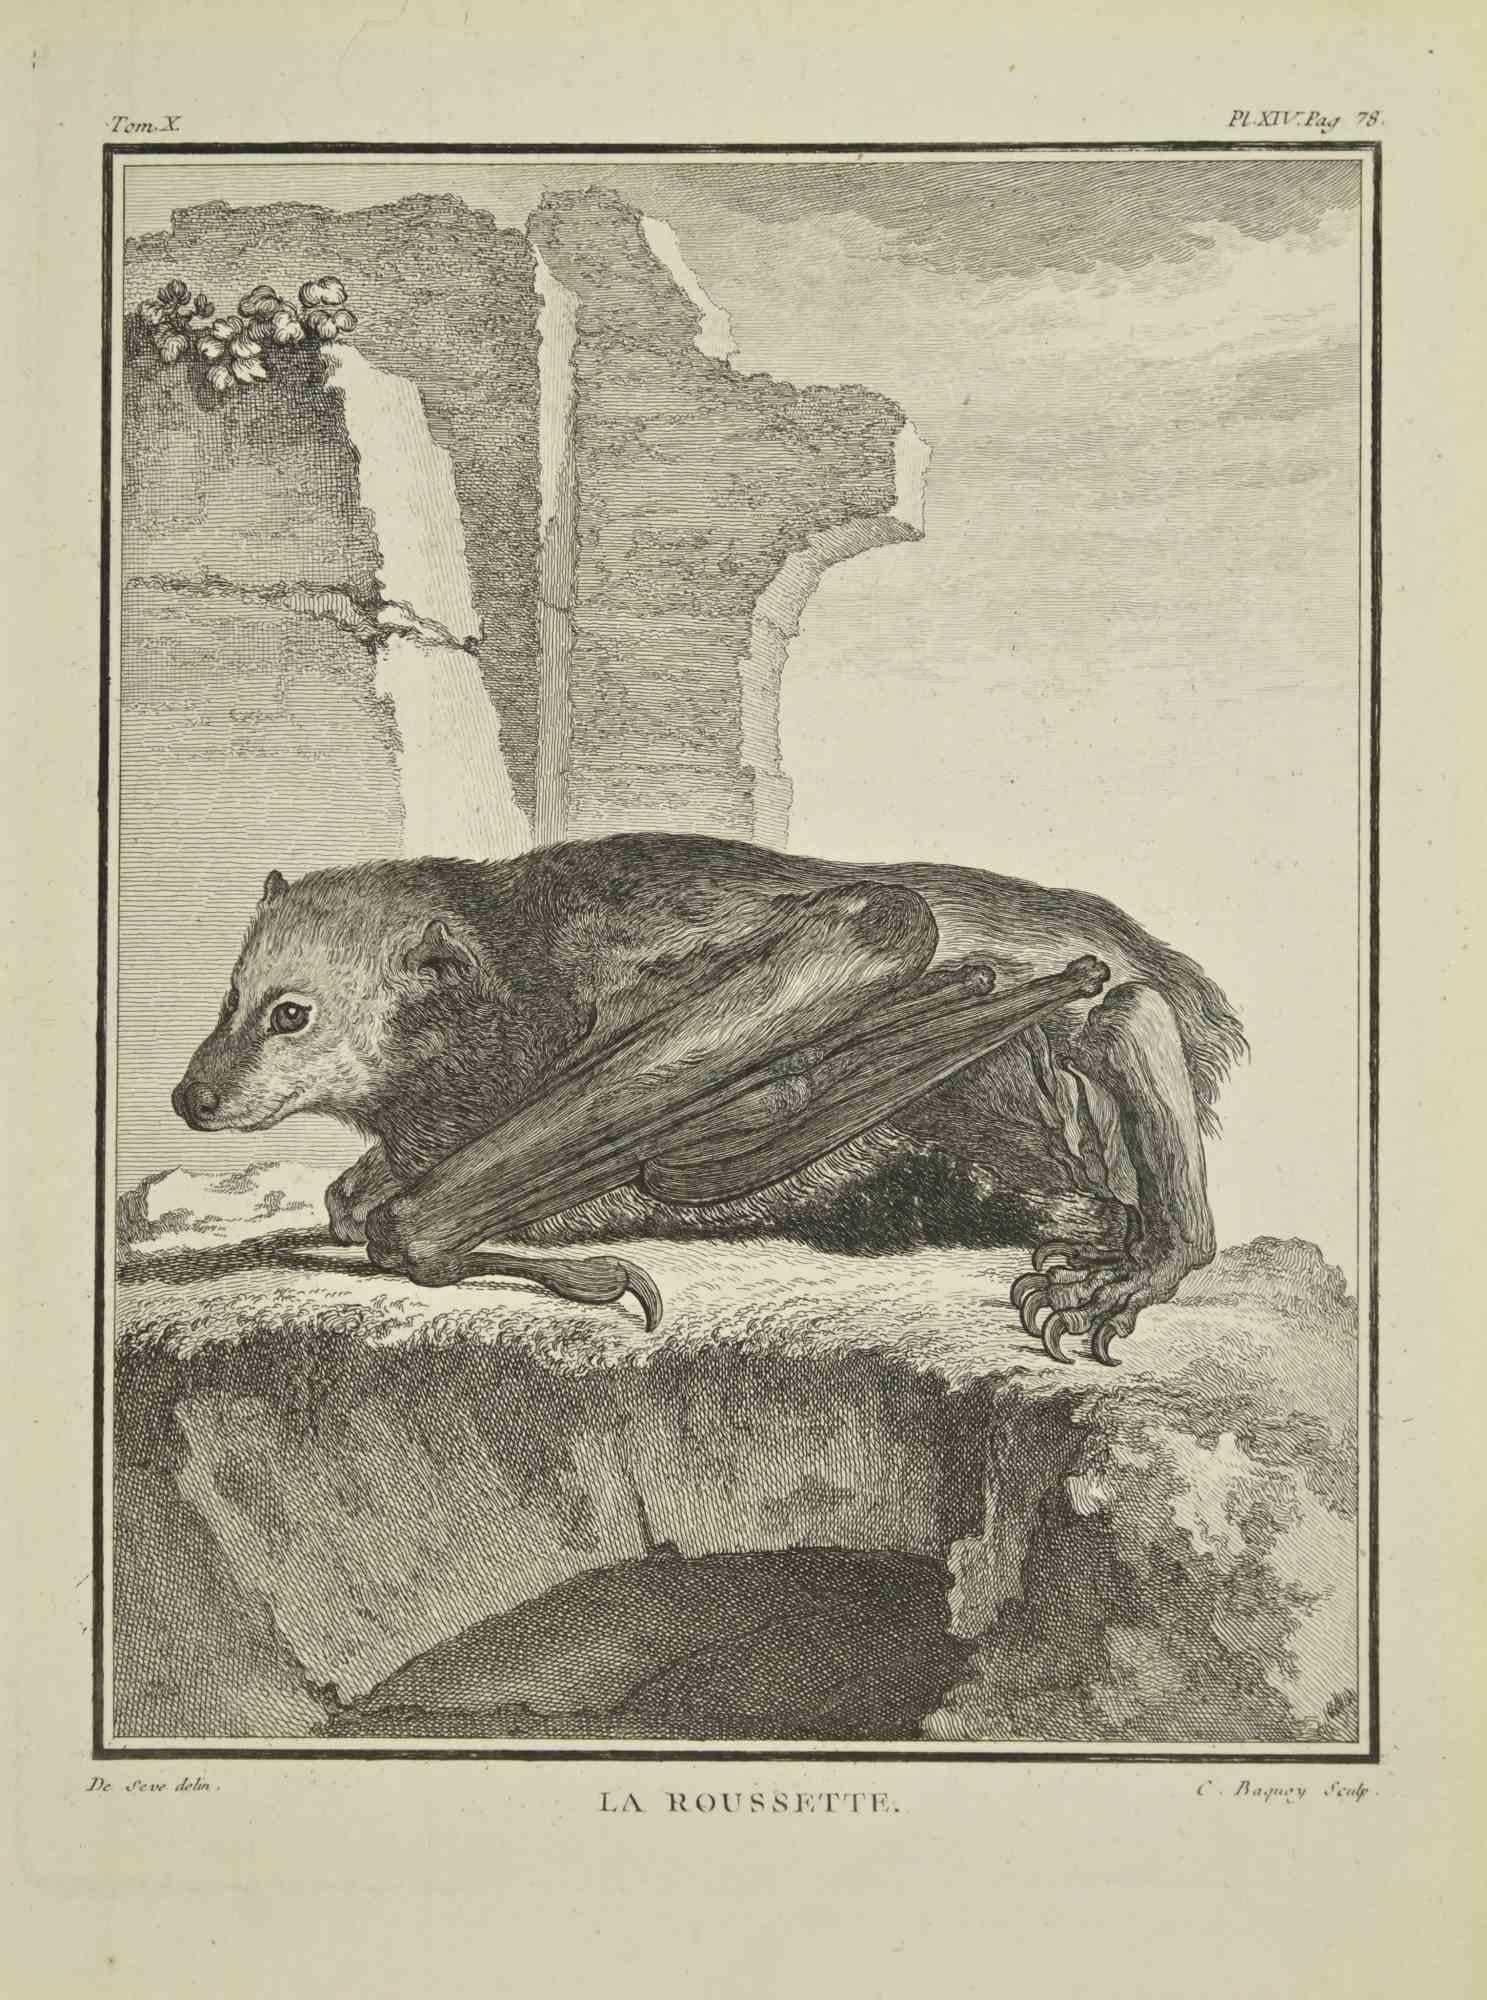 La Roussette is an etching realized by Jean Charles Baquoy in 1771.

It belongs to the suite "Histoire Naturelle de Buffon".

The Artist's signature is engraved lower right.

Good conditions.